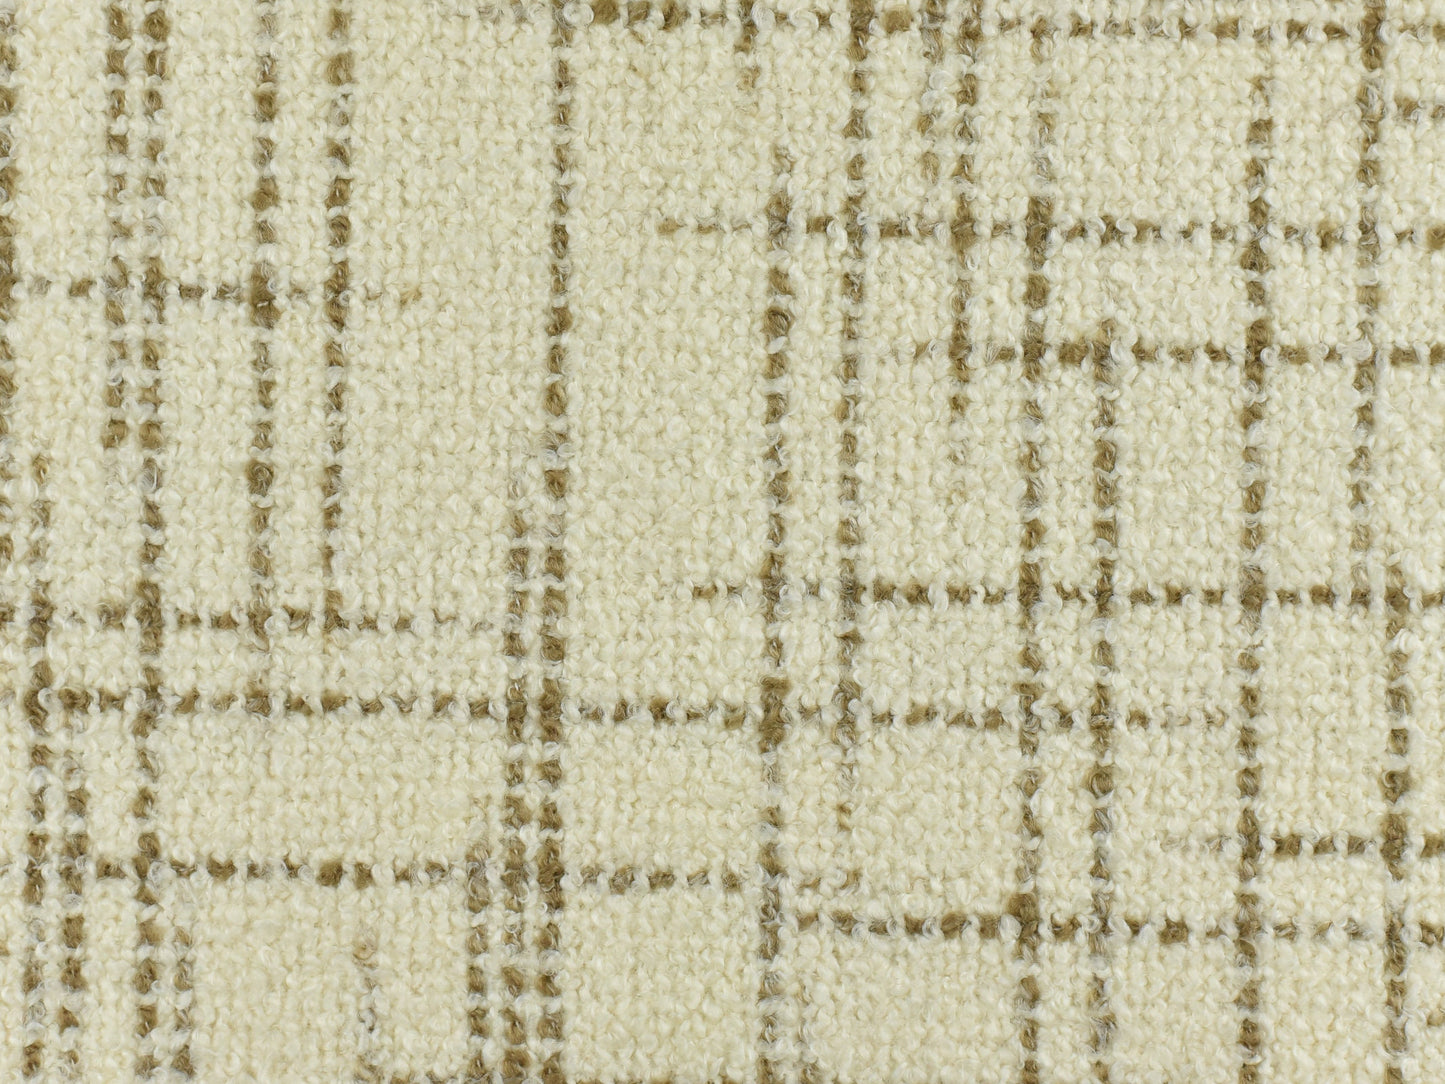 Retro Strip Gingham Tweed Upholstery Fabric By The Yard For Home Interiors Muesli